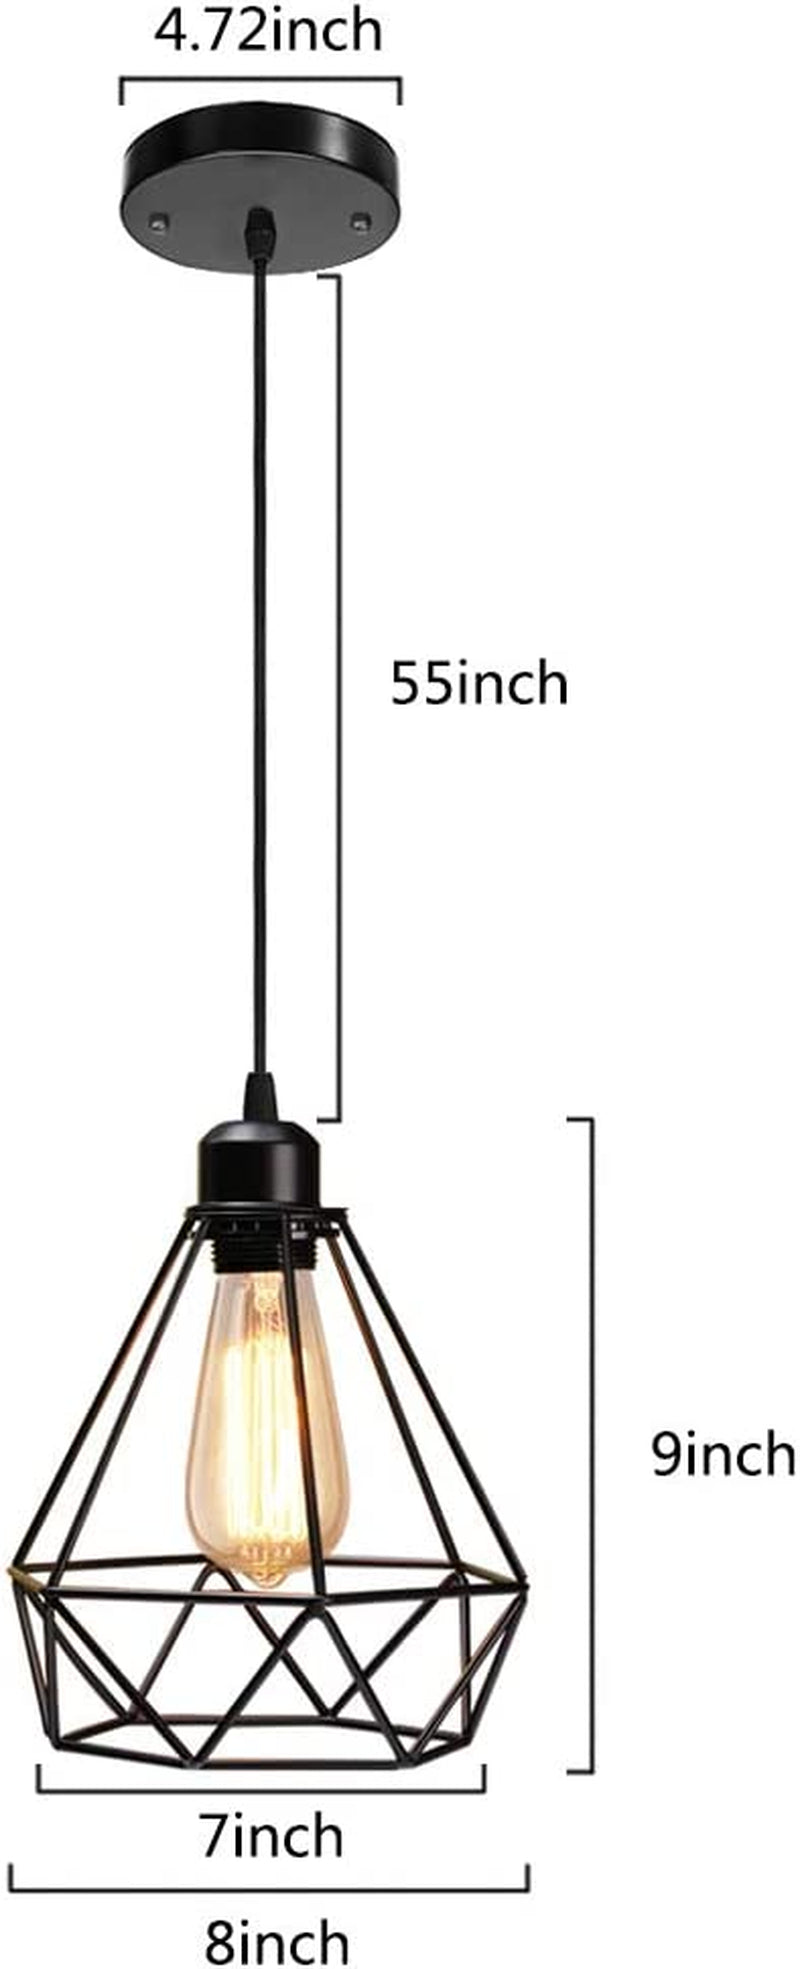 HESSION Retro Pendant Light, Industrial Metal Cage Mini Pendant Light Oil Rubbed Finish, Rustic Chandeliers Ceiling Light Fixture for Farmhouse Kitchen Island Dining Room Covered Patio